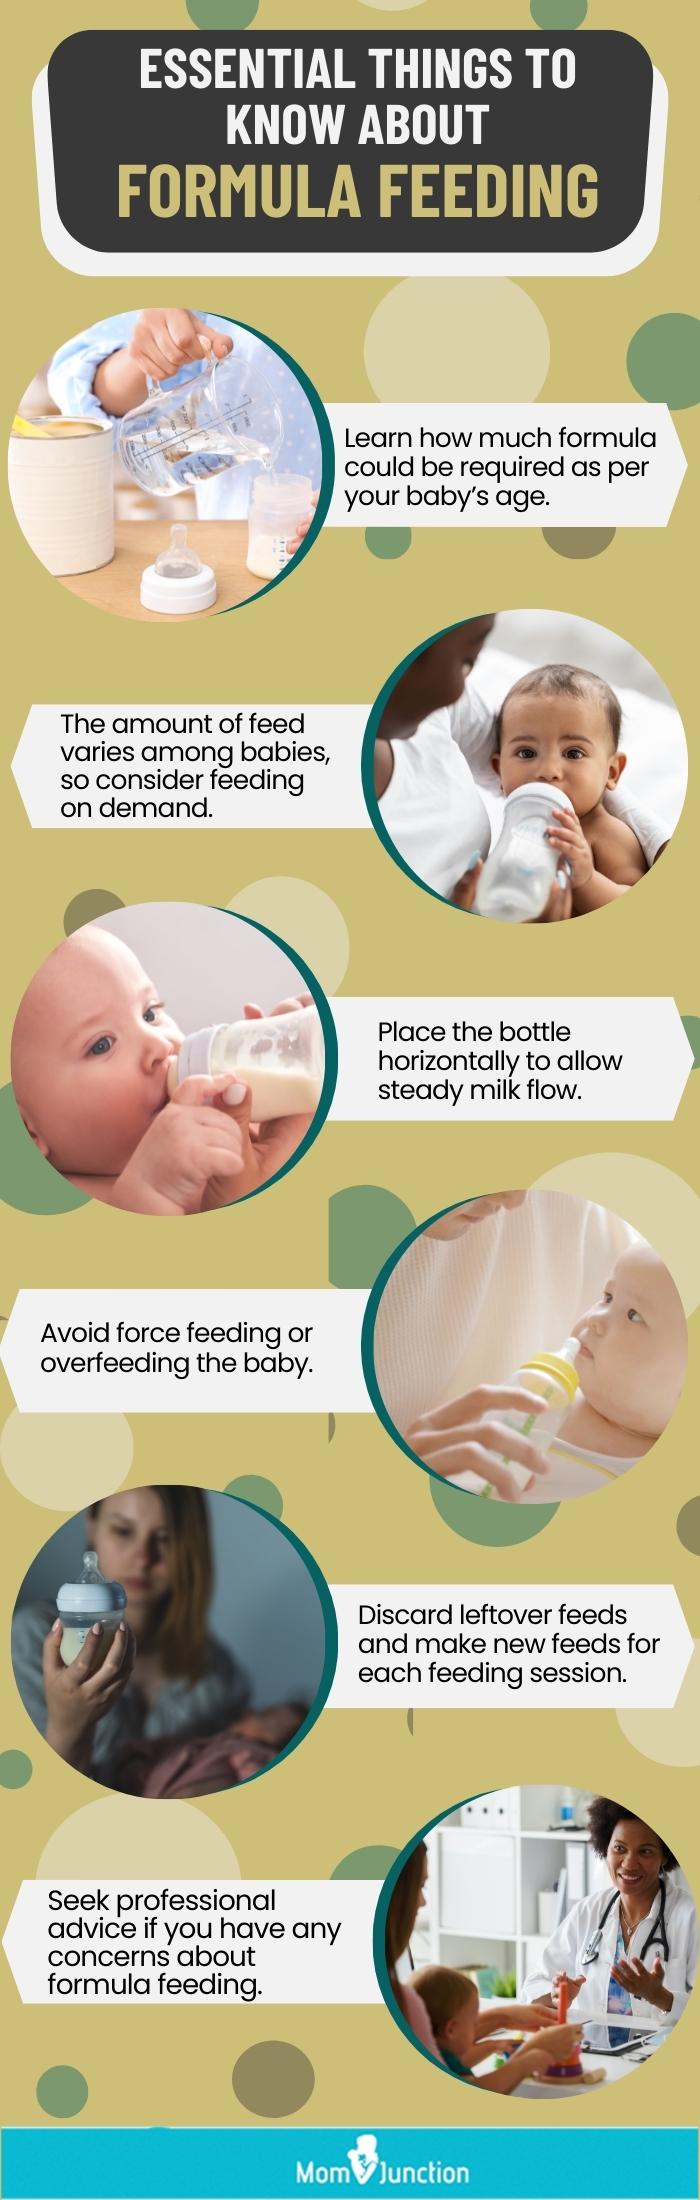 essential things to know about formula feeding [infographic]